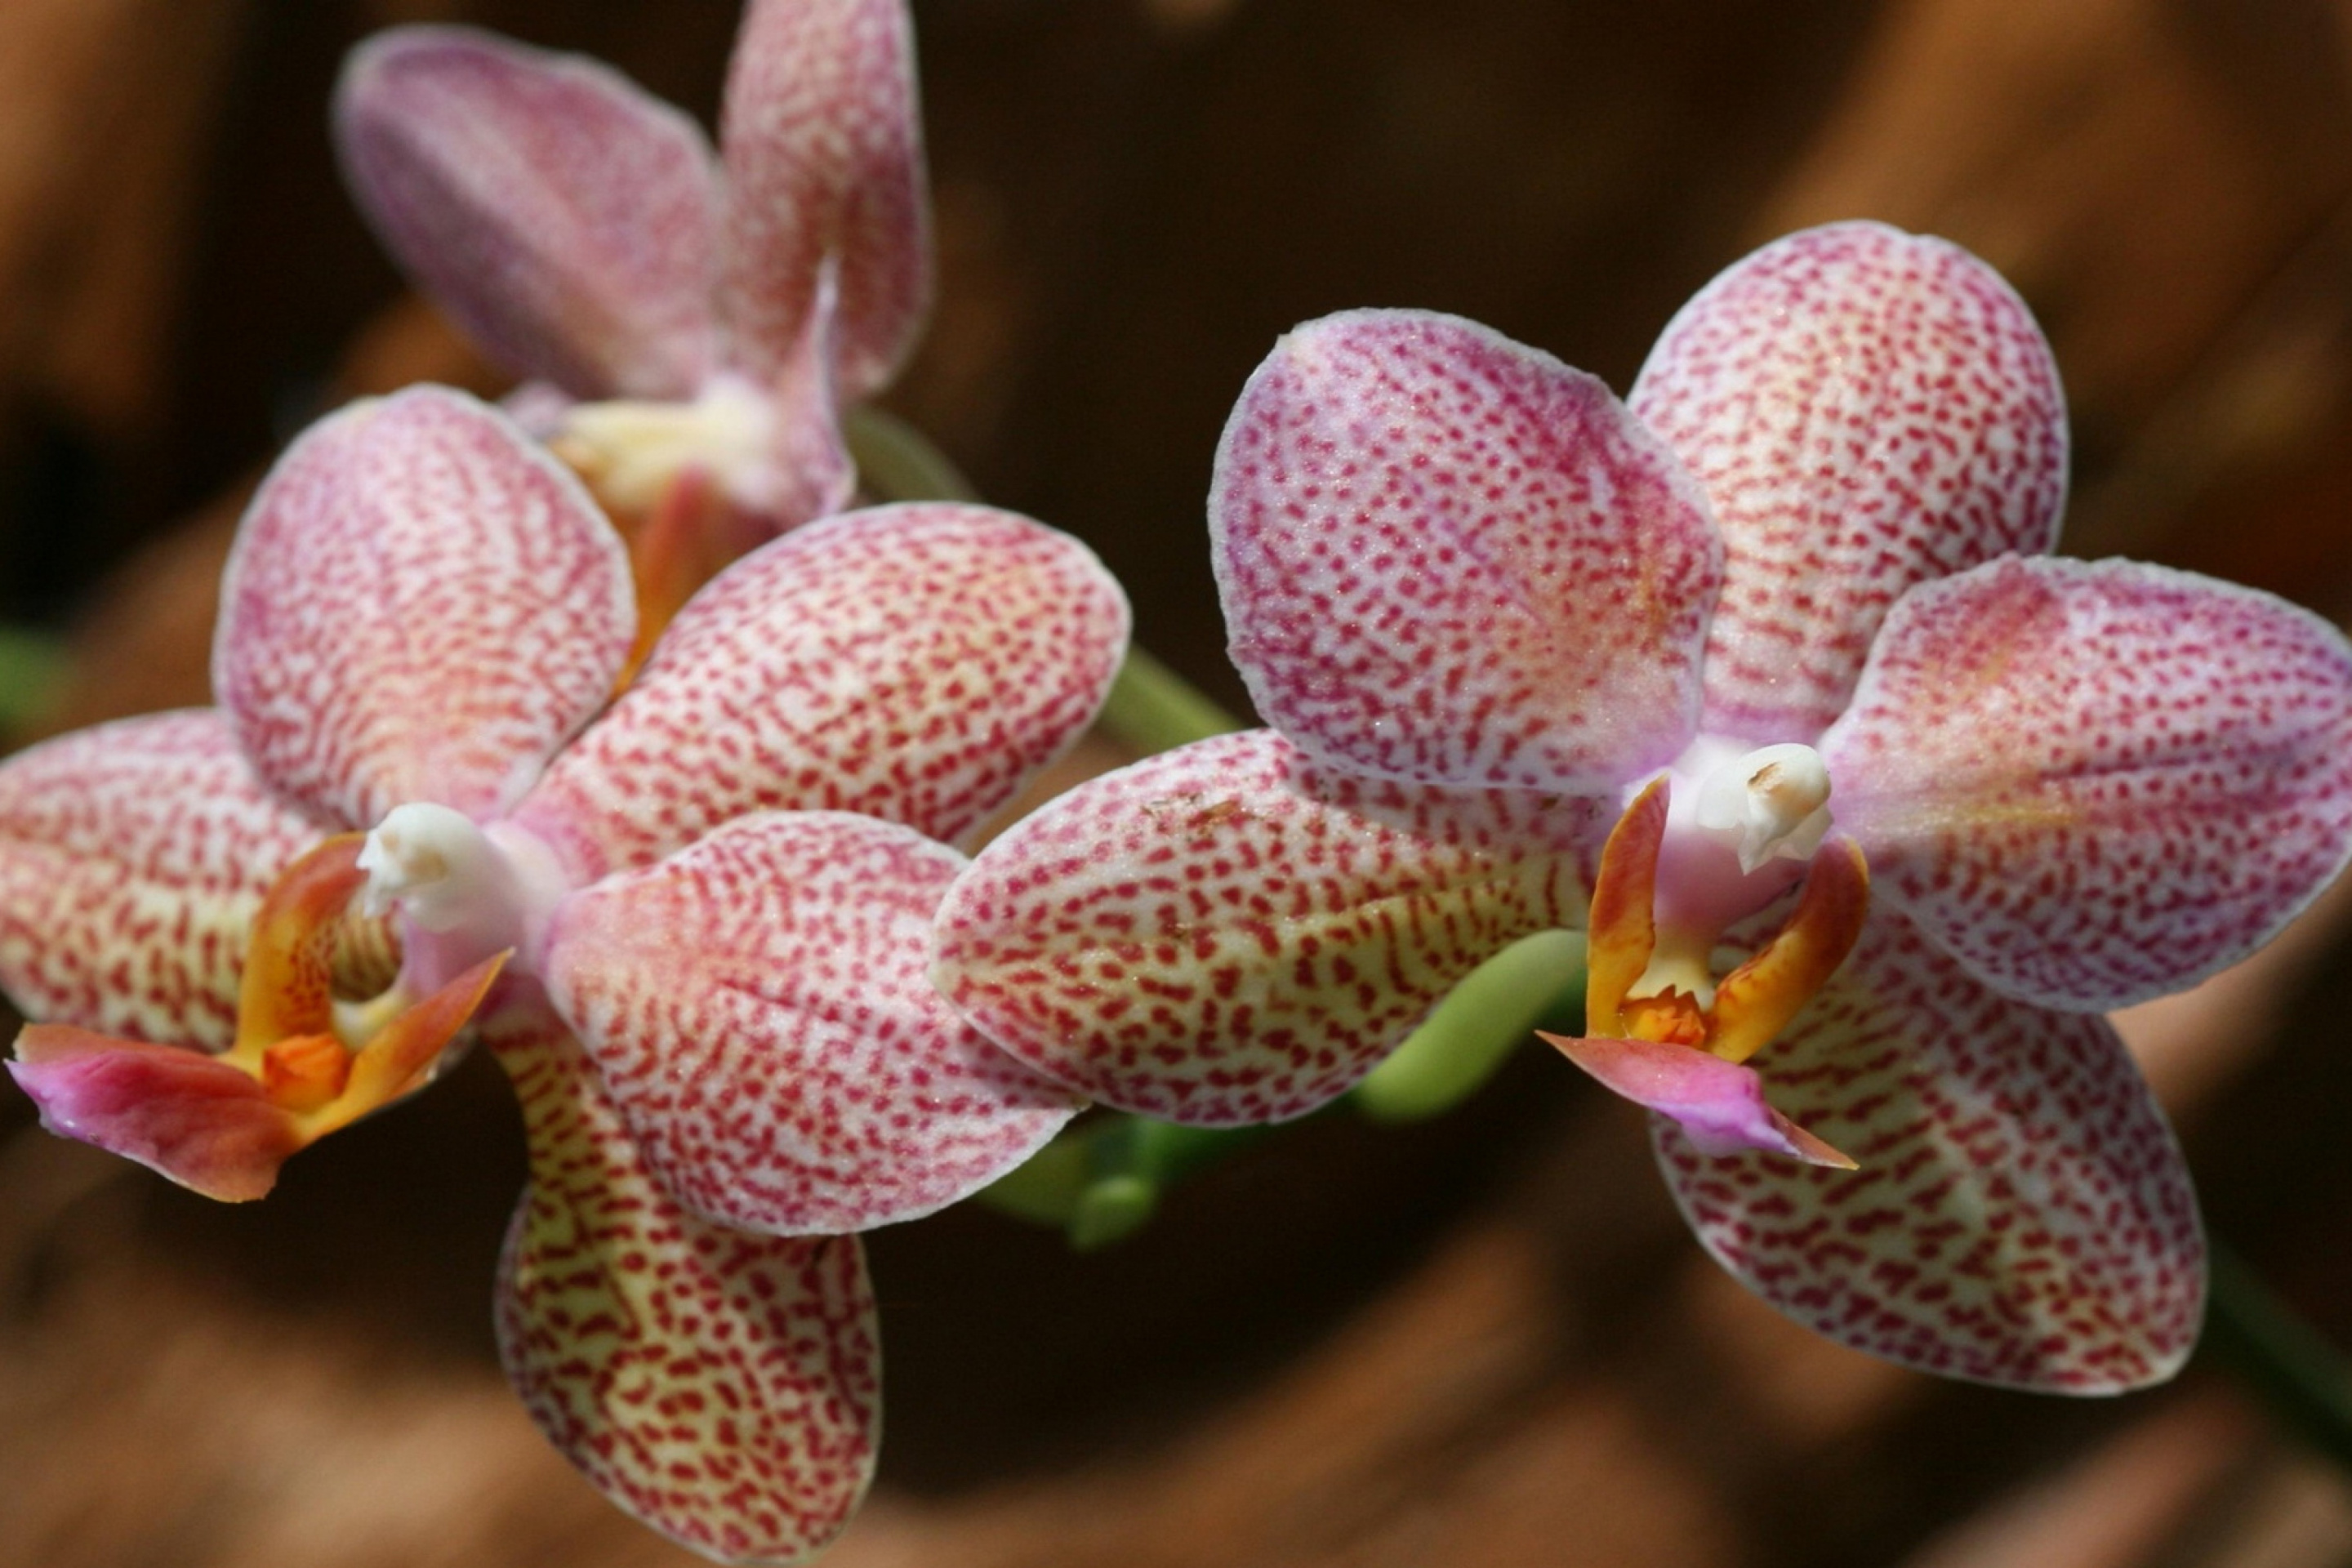 Amazing Orchids wallpaper 2880x1920